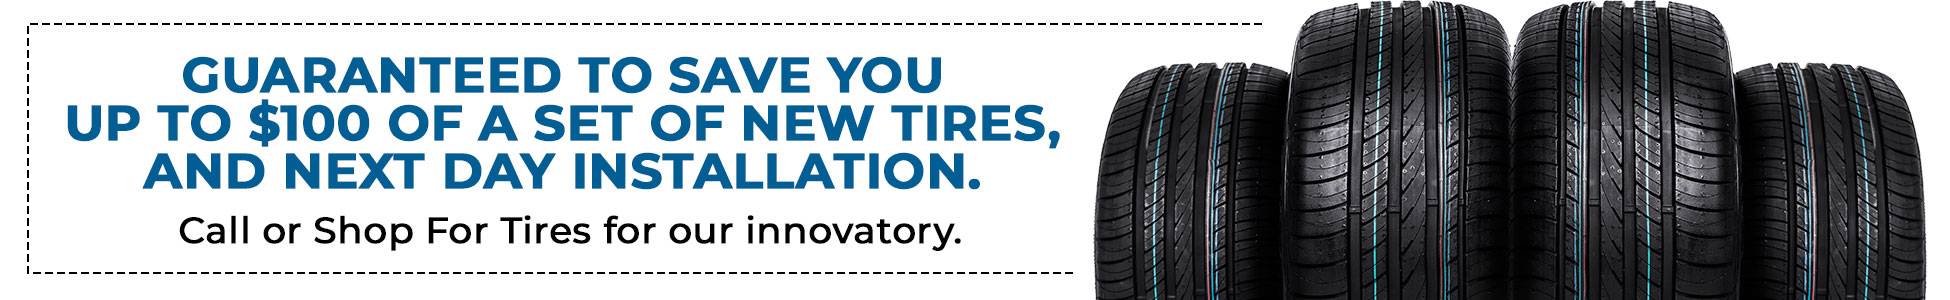 Guaranteed to save you up to $100 of a set of new tires, and next day installation. Call or Shop For Tires for our innovatory.